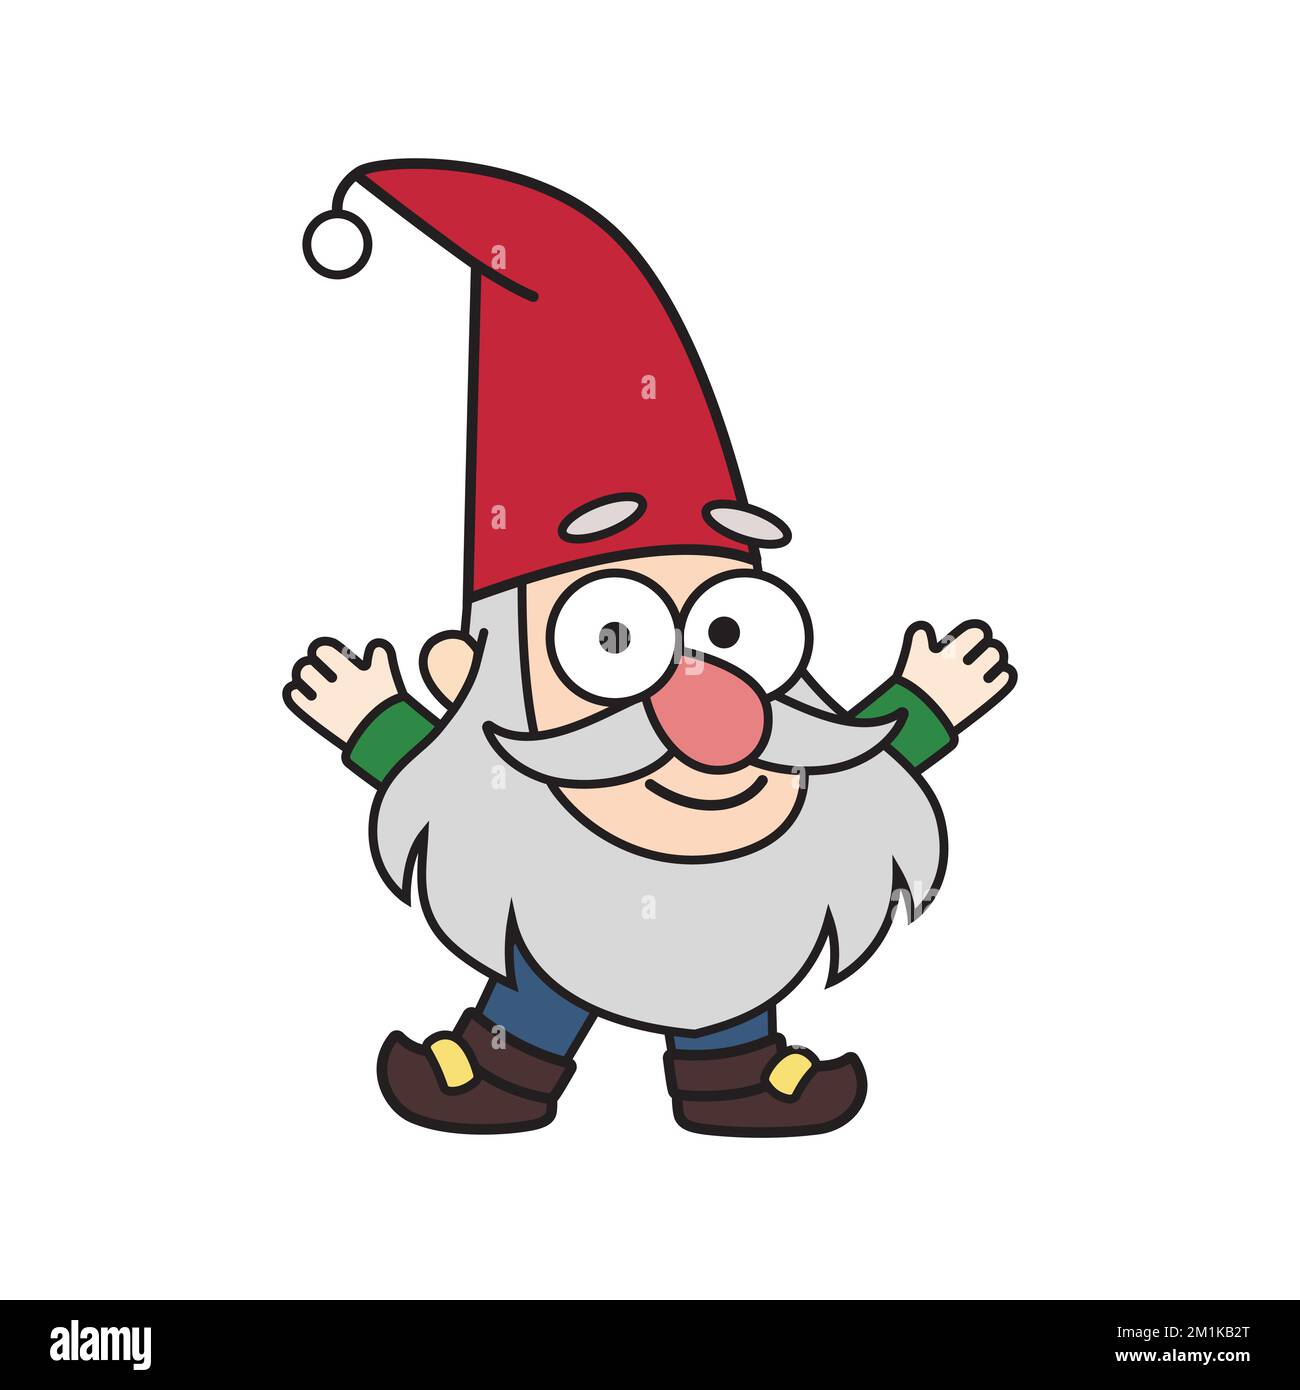 Cheerful little garden gnome, dwarf, oldman is wearing red hat in cartoon style. Colorful vector fairytale kids illustration, drawing character, mascot, sticker Stock Vector